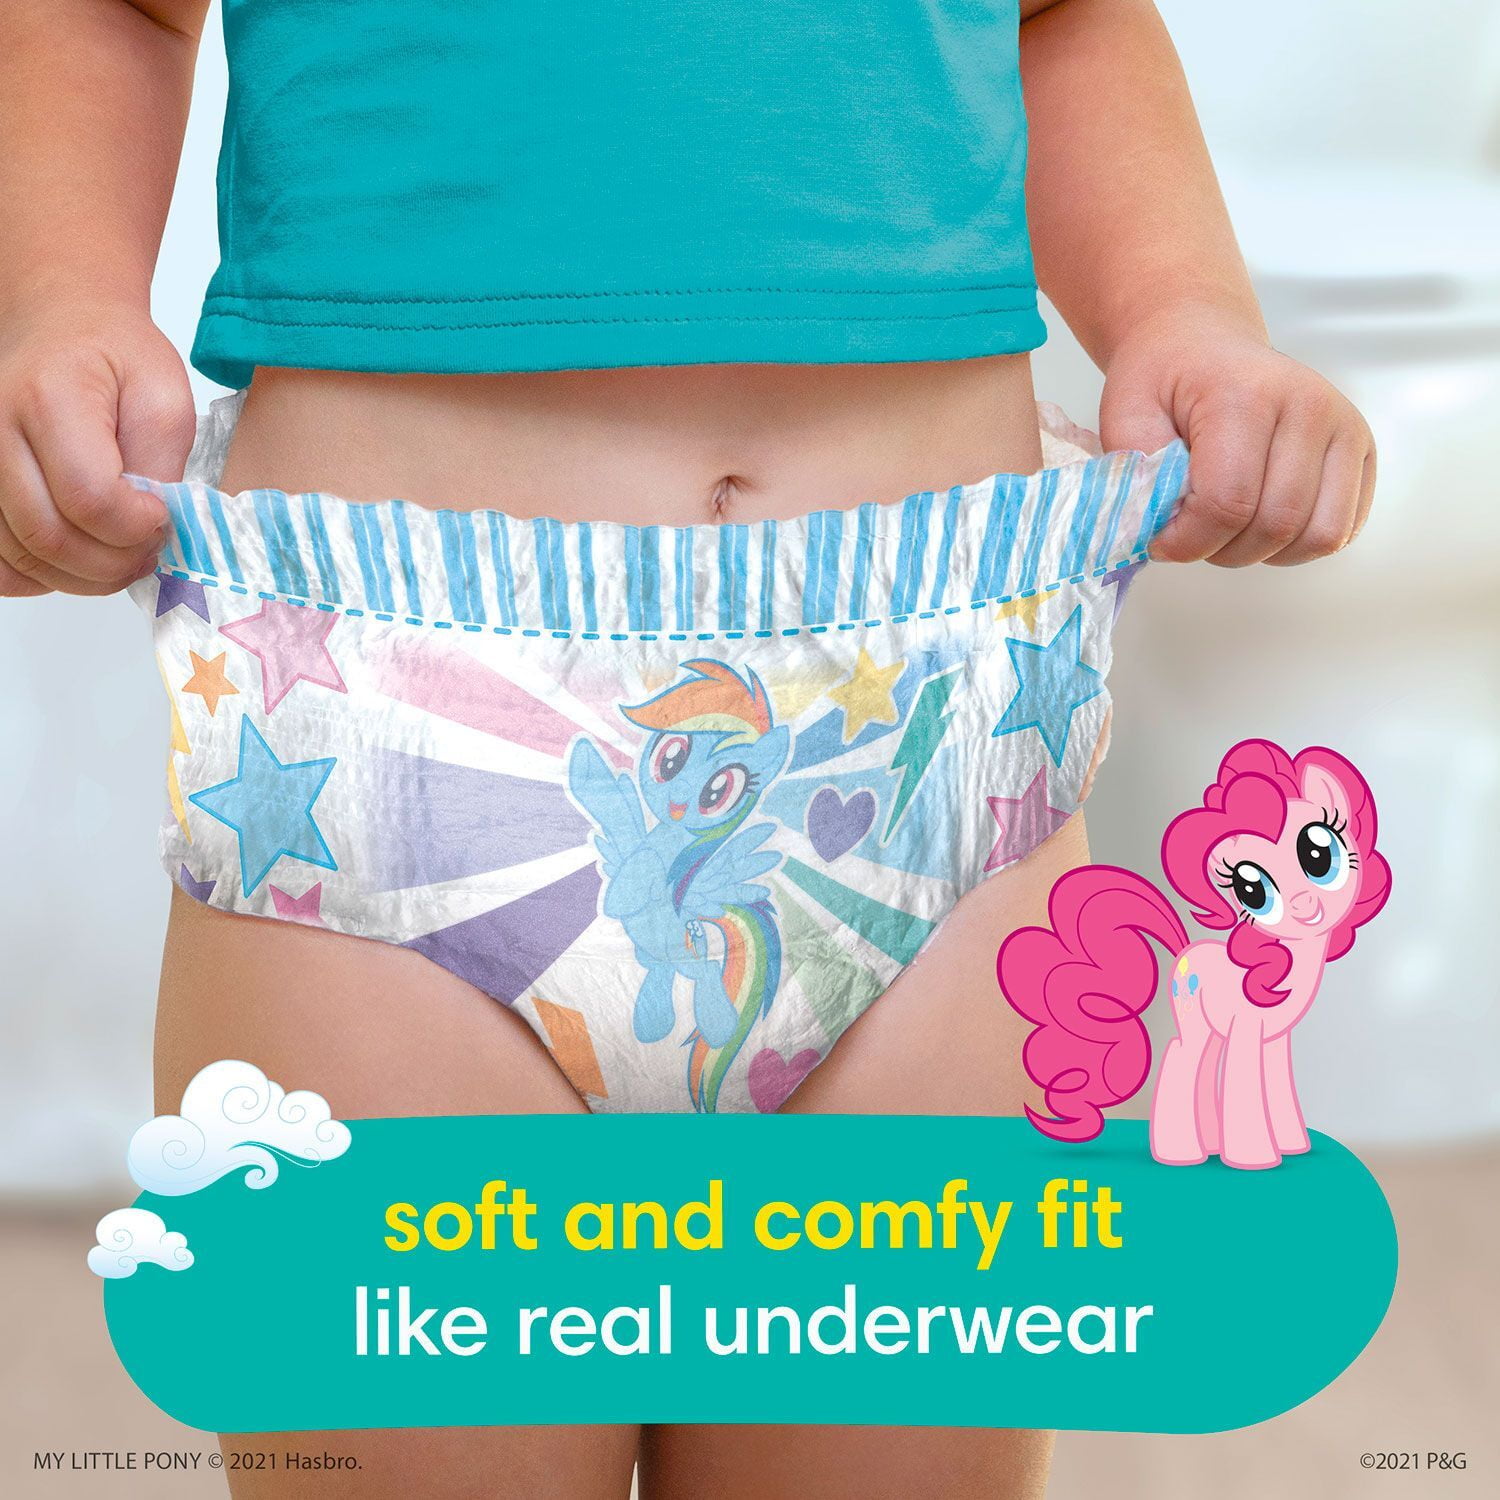 Pampers Easy Ups Girls Training Pants, Size 2T-3T, 84 Count